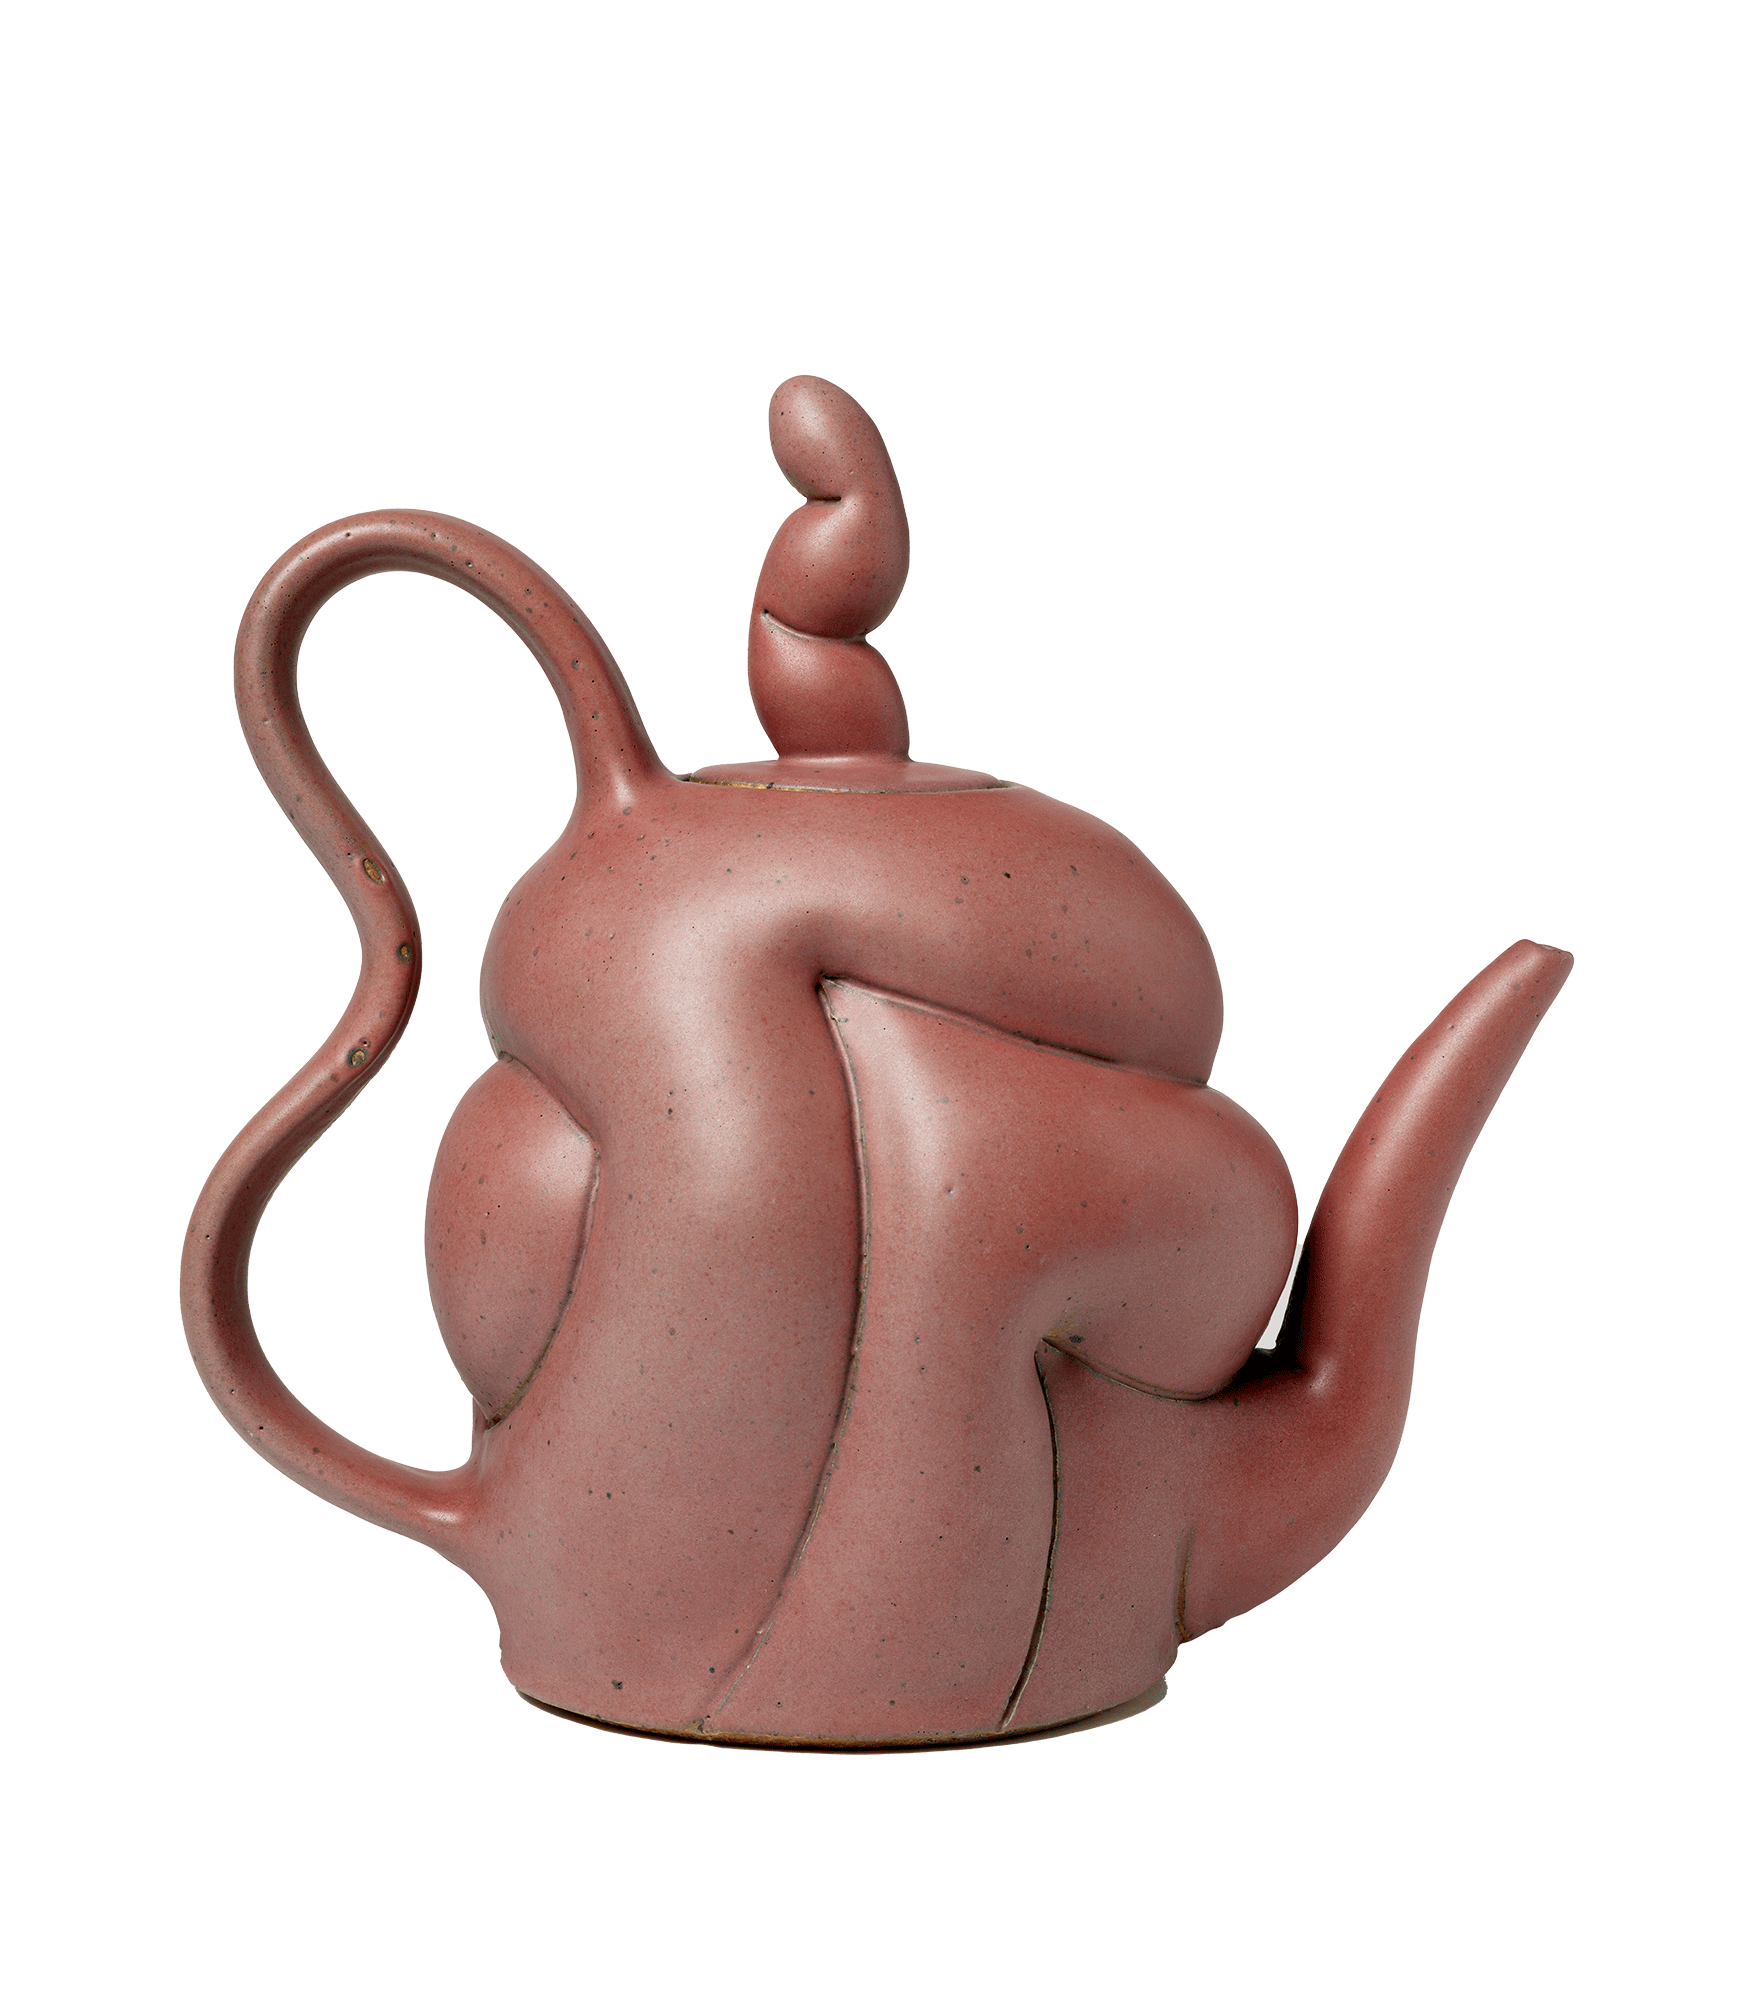 /Rust%20colored%20teapot%20in%20profile%20with%20over-exaggerated%20curves%20and%20tall%20finial.%20Spout%20points%20left%20and%20a%20large%20curving%20handle%20is%20to%20the%20right.